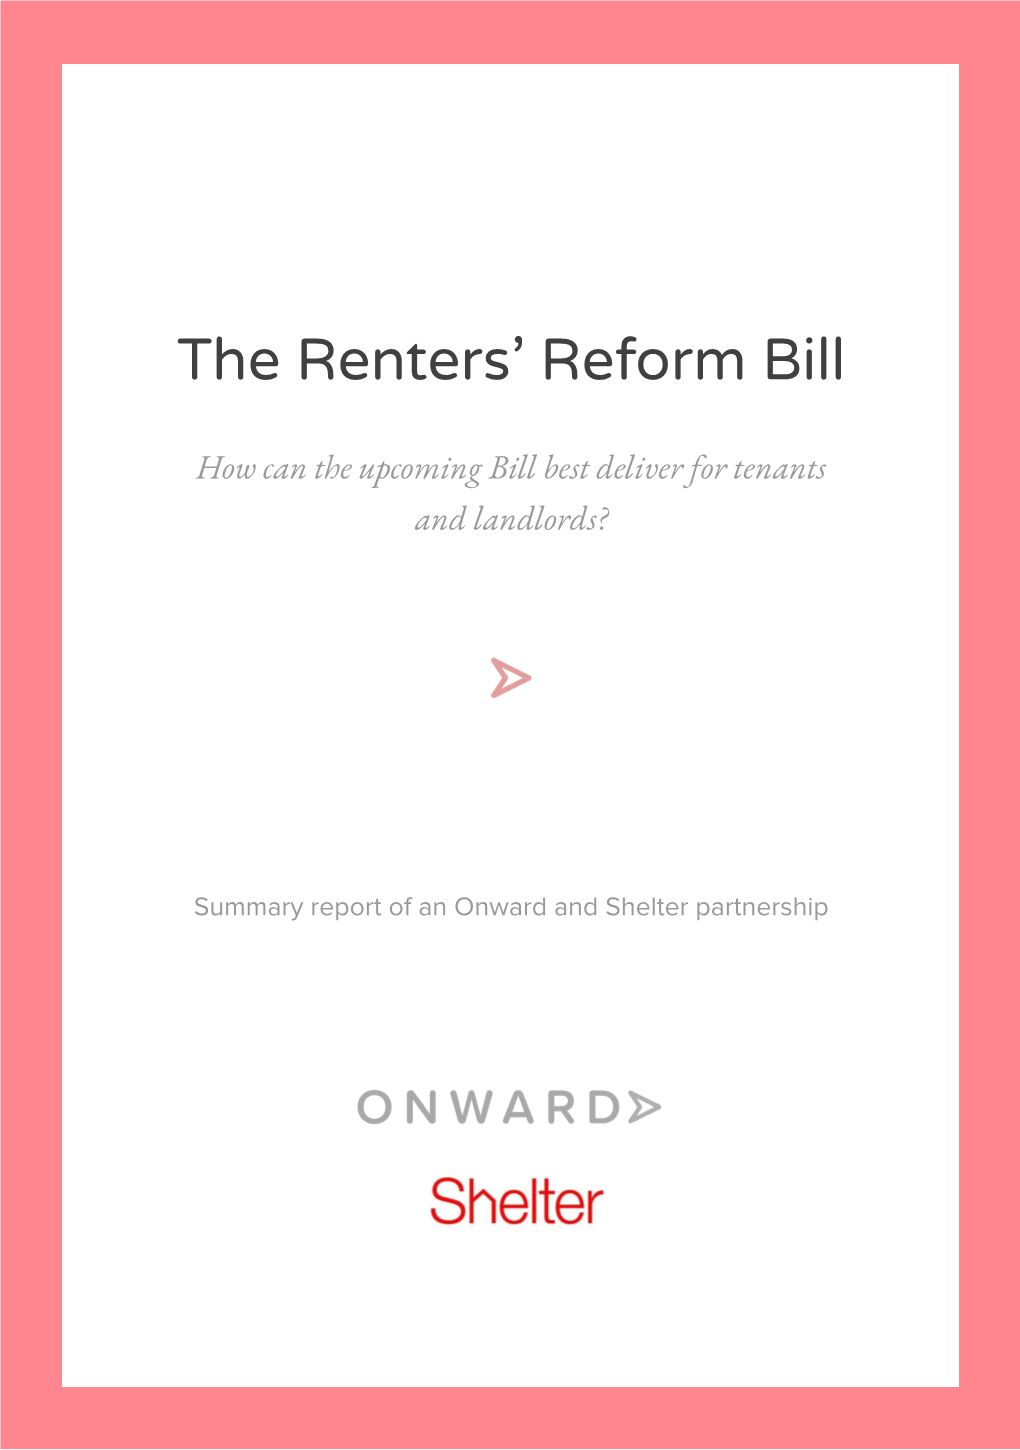 The Renters' Reform Bill: How Can the Upcoming Bill Best Deliver for Tenants and Landlords?